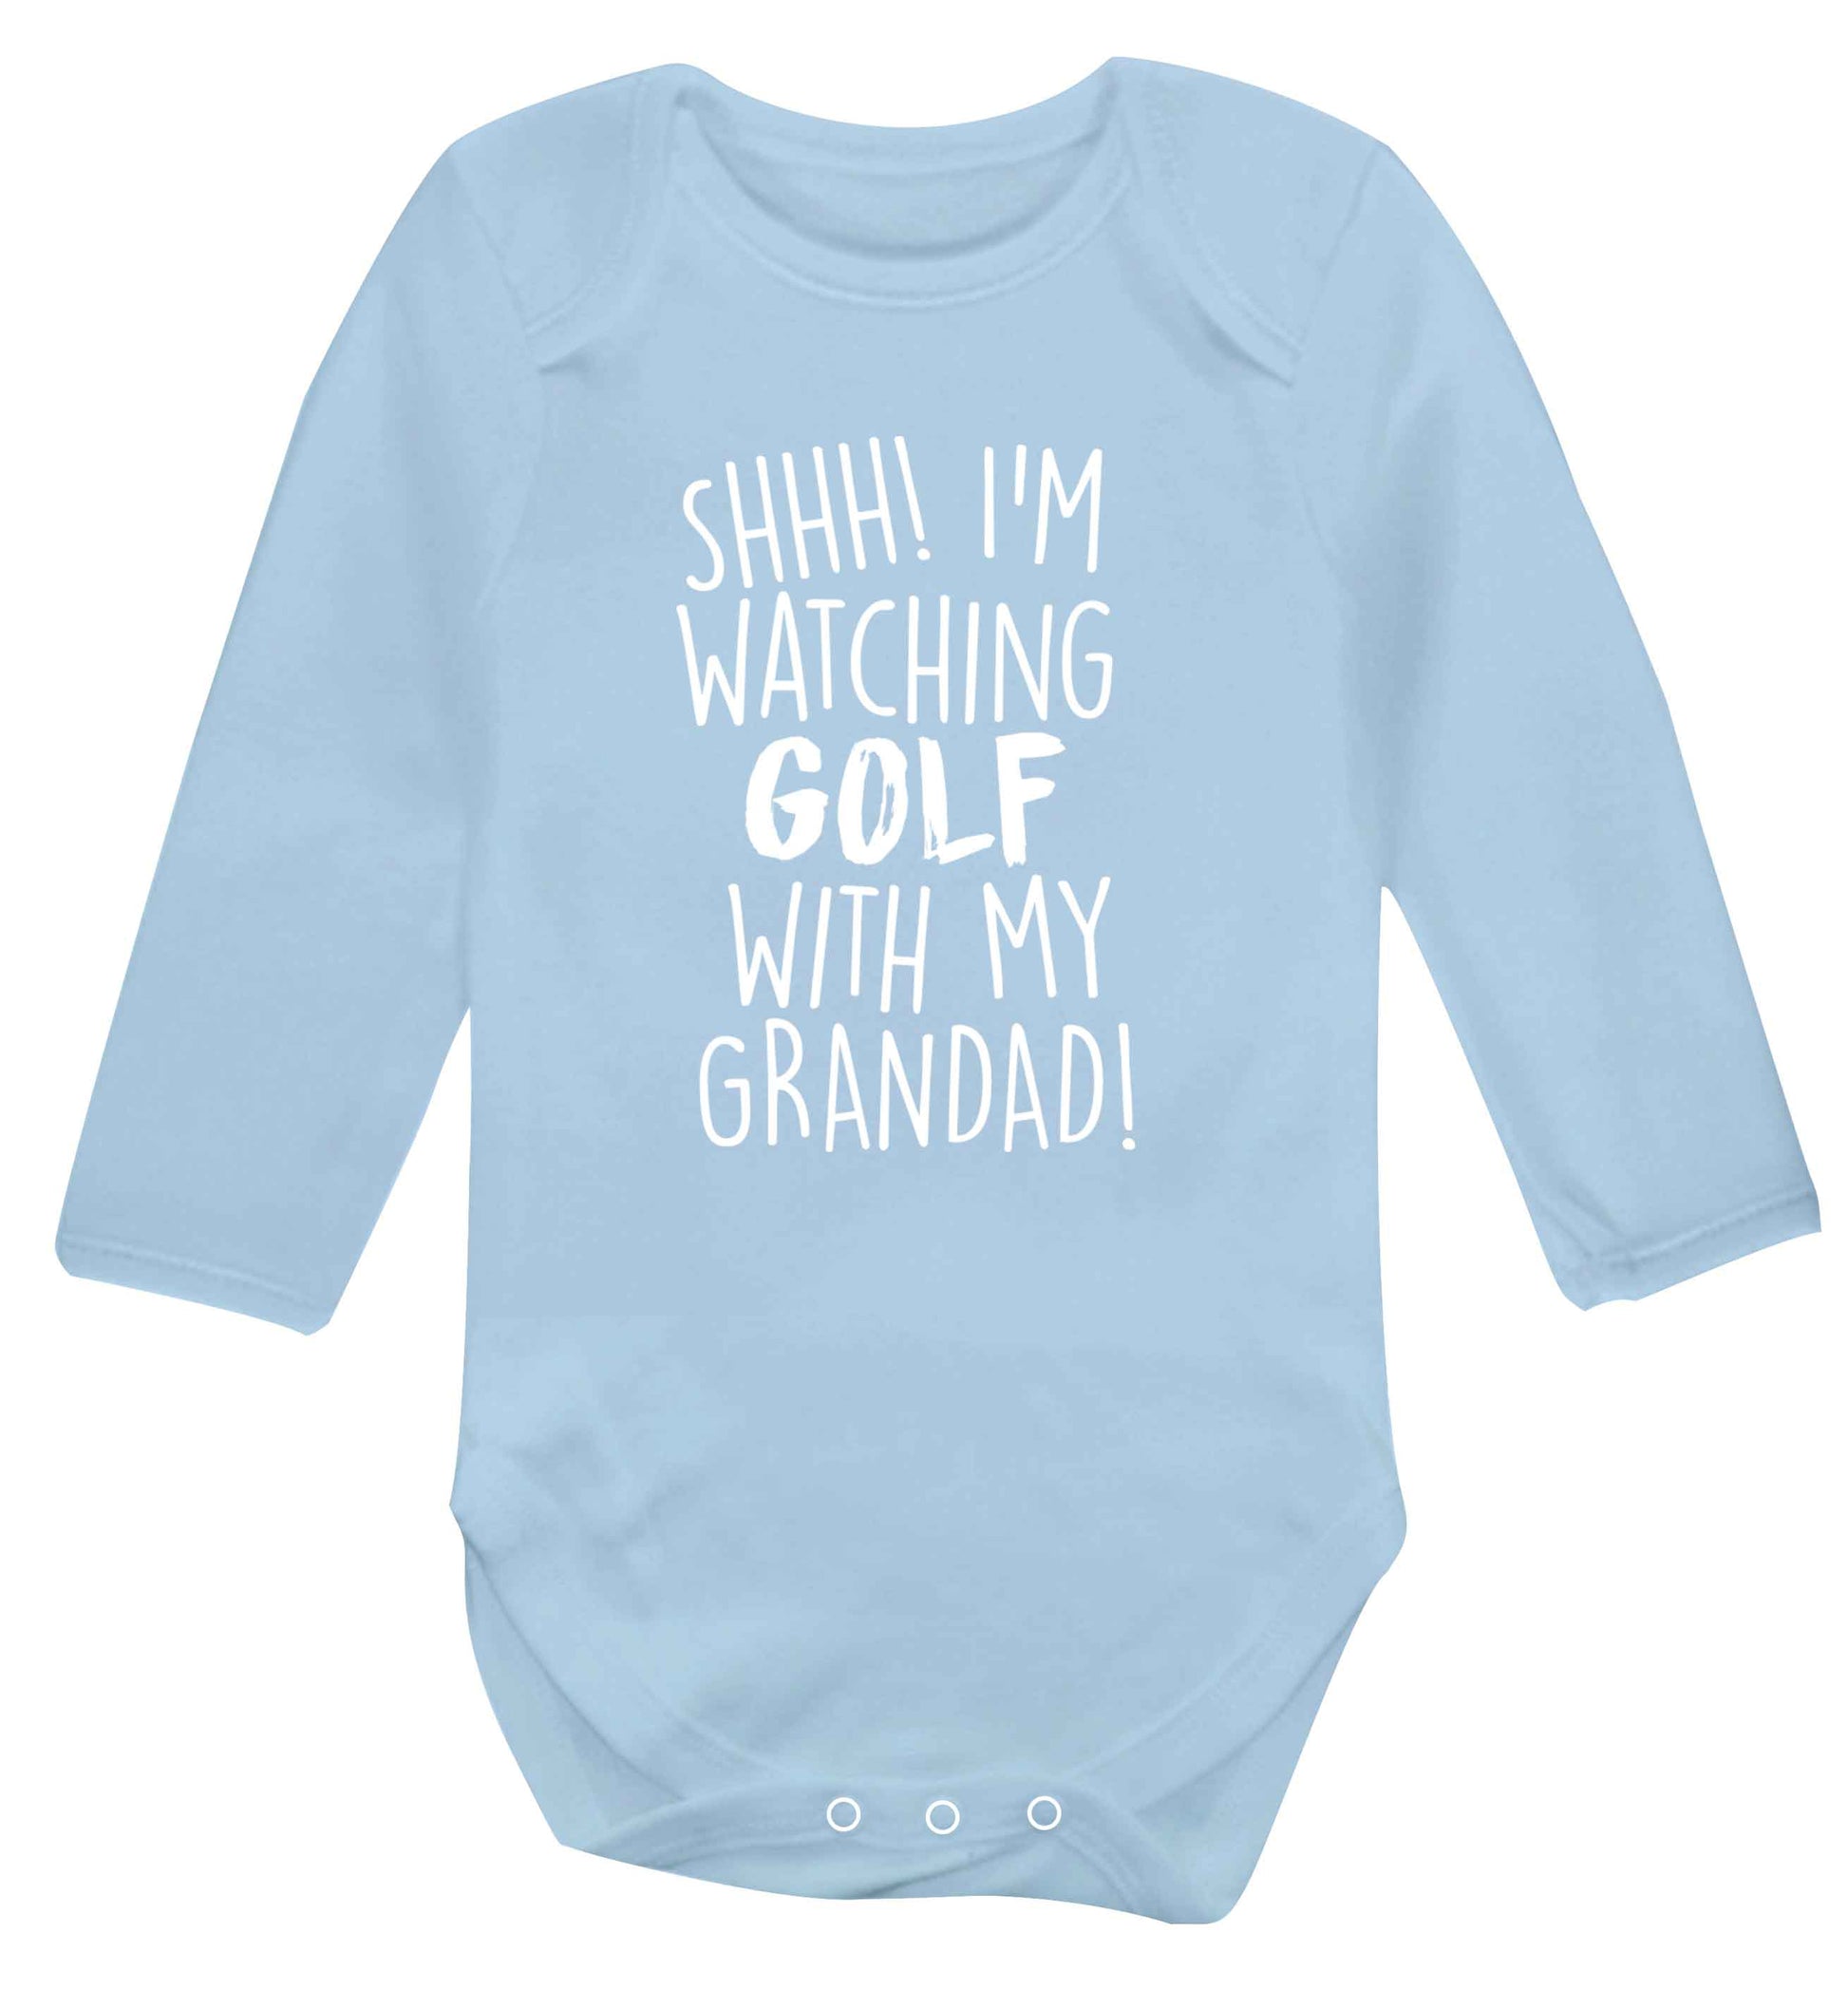 Shh I'm watching golf with my grandad Baby Vest long sleeved pale blue 6-12 months